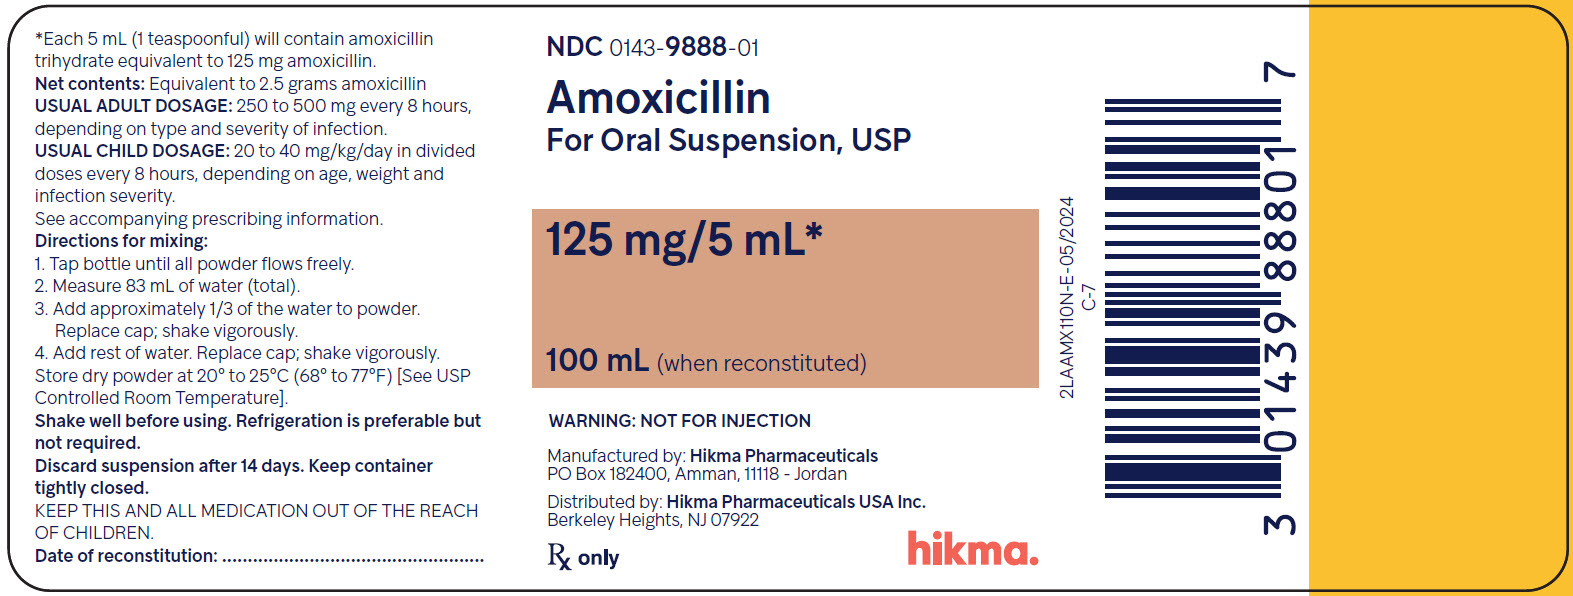 Amoxicillin for Oral Suspension USP, 125 mg/5 mL (100 mL when reconstituted) bottle label image